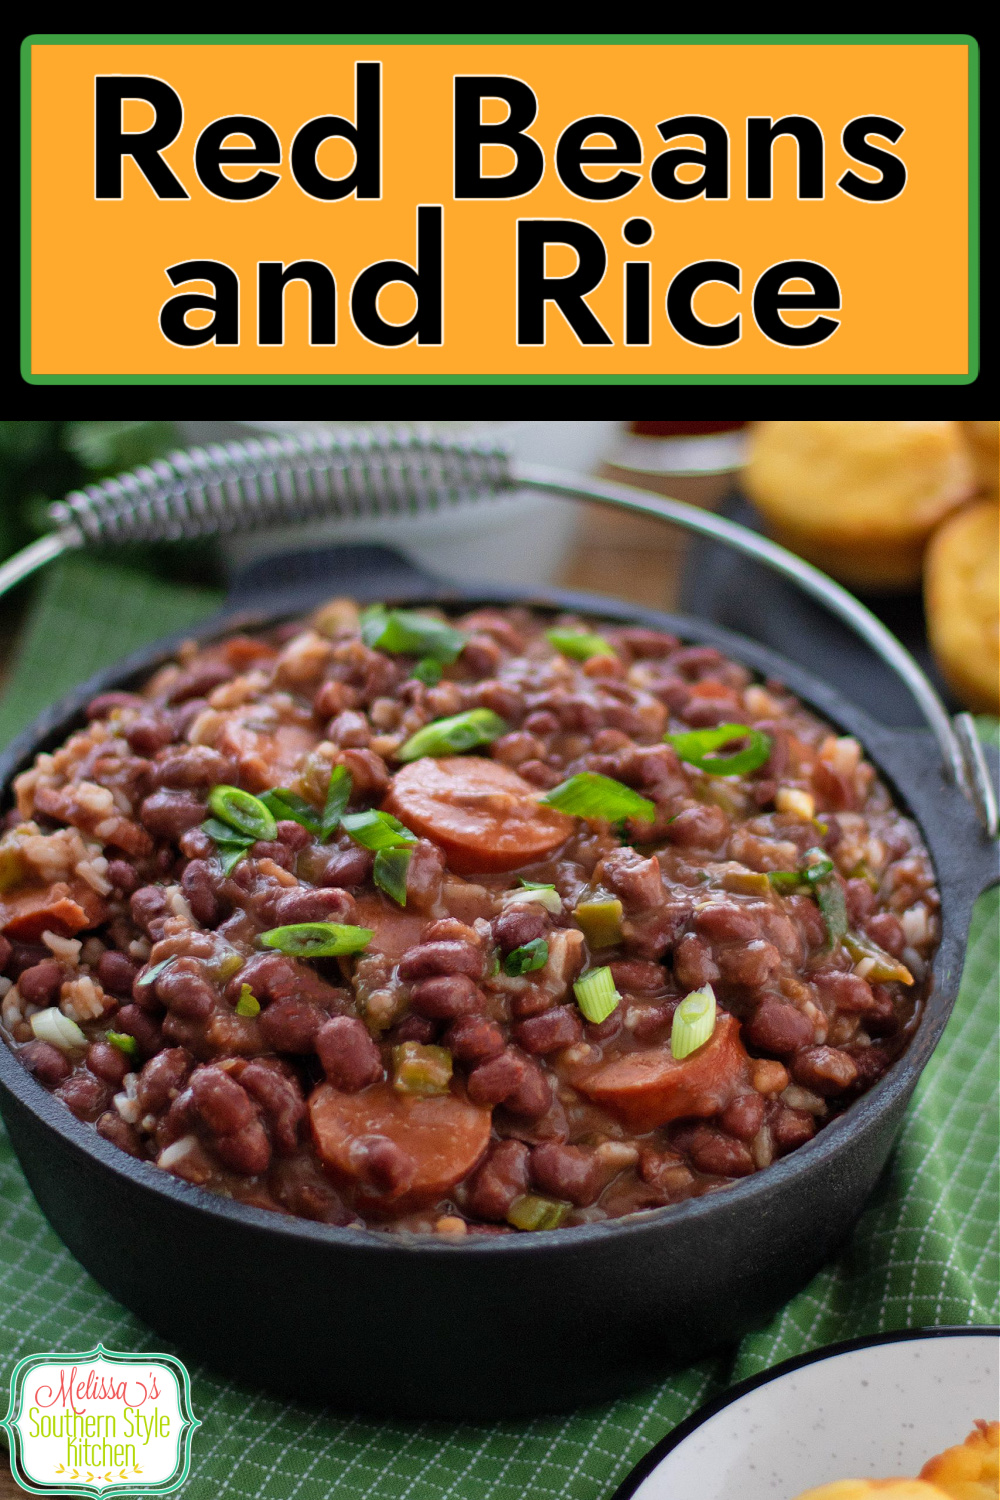 This dish featuring perfectly seasoned red beans, andouille sausage with rice is tummy filling and won't break the bank #redbeaansandrice #redbewans #andouillesausage #Cajunfood #beans #ricerecipes #dinnerideas #dinner #southernfood #southernrecipes via @melissasssk